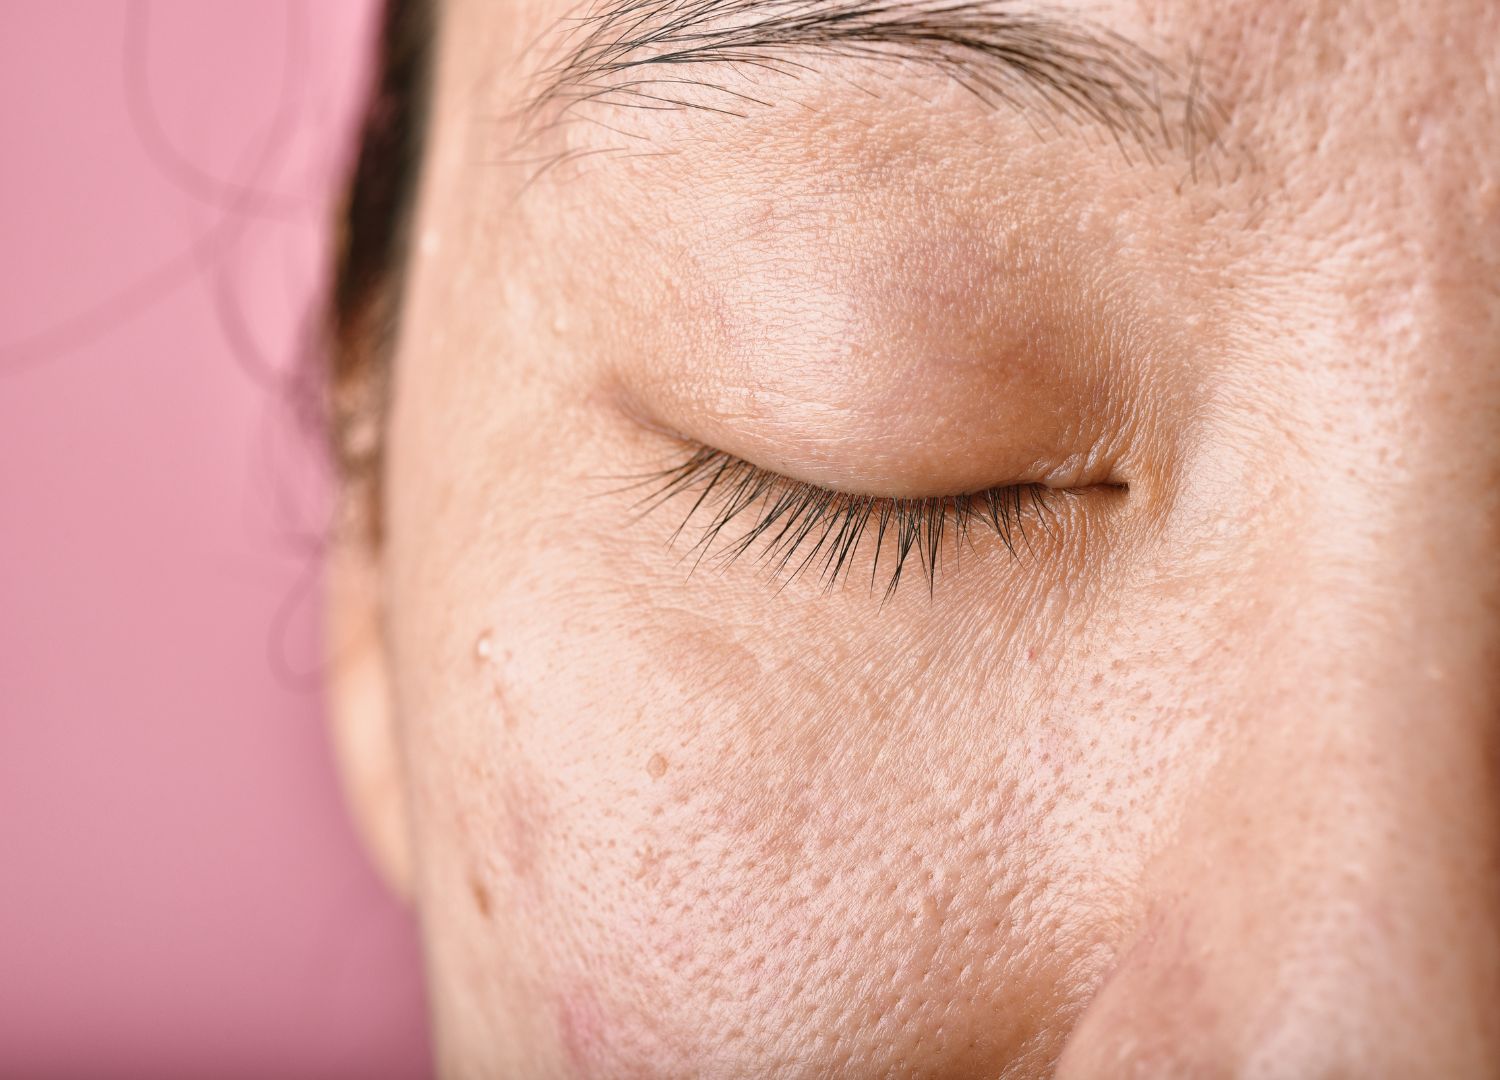 Pico Laser is a treatment that can treat multiple skin concerns